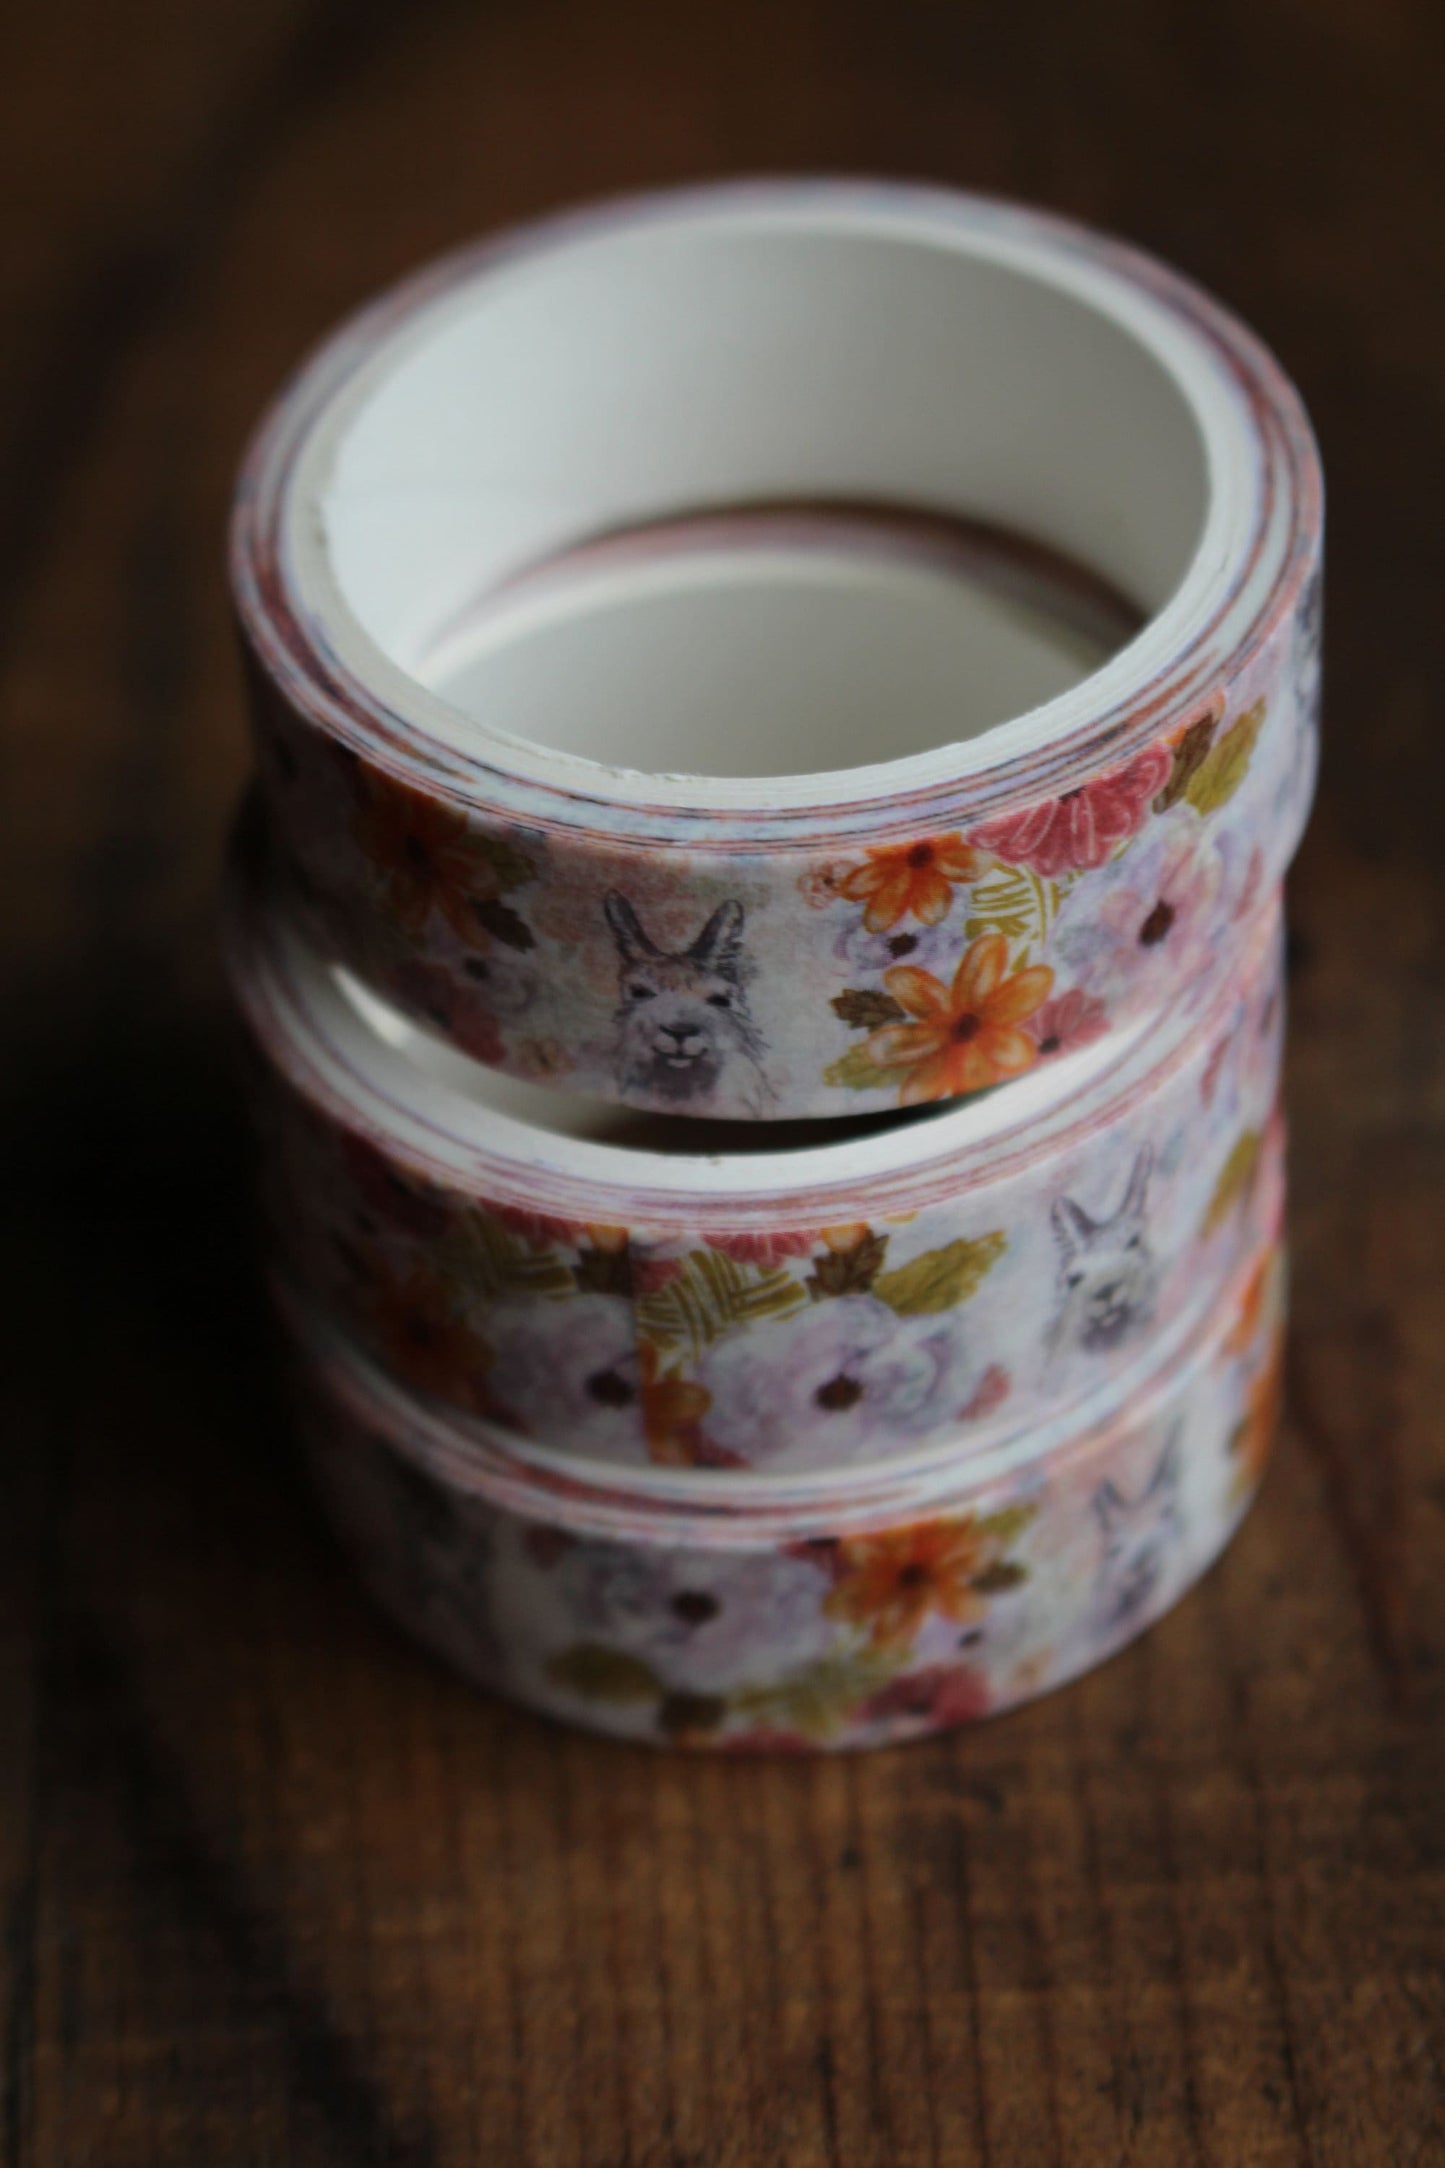 Llama Washi Tape • Japanese Washi Tape for Crafting and Gifts • Flowers and Llamas • Gift for Scrapbookers